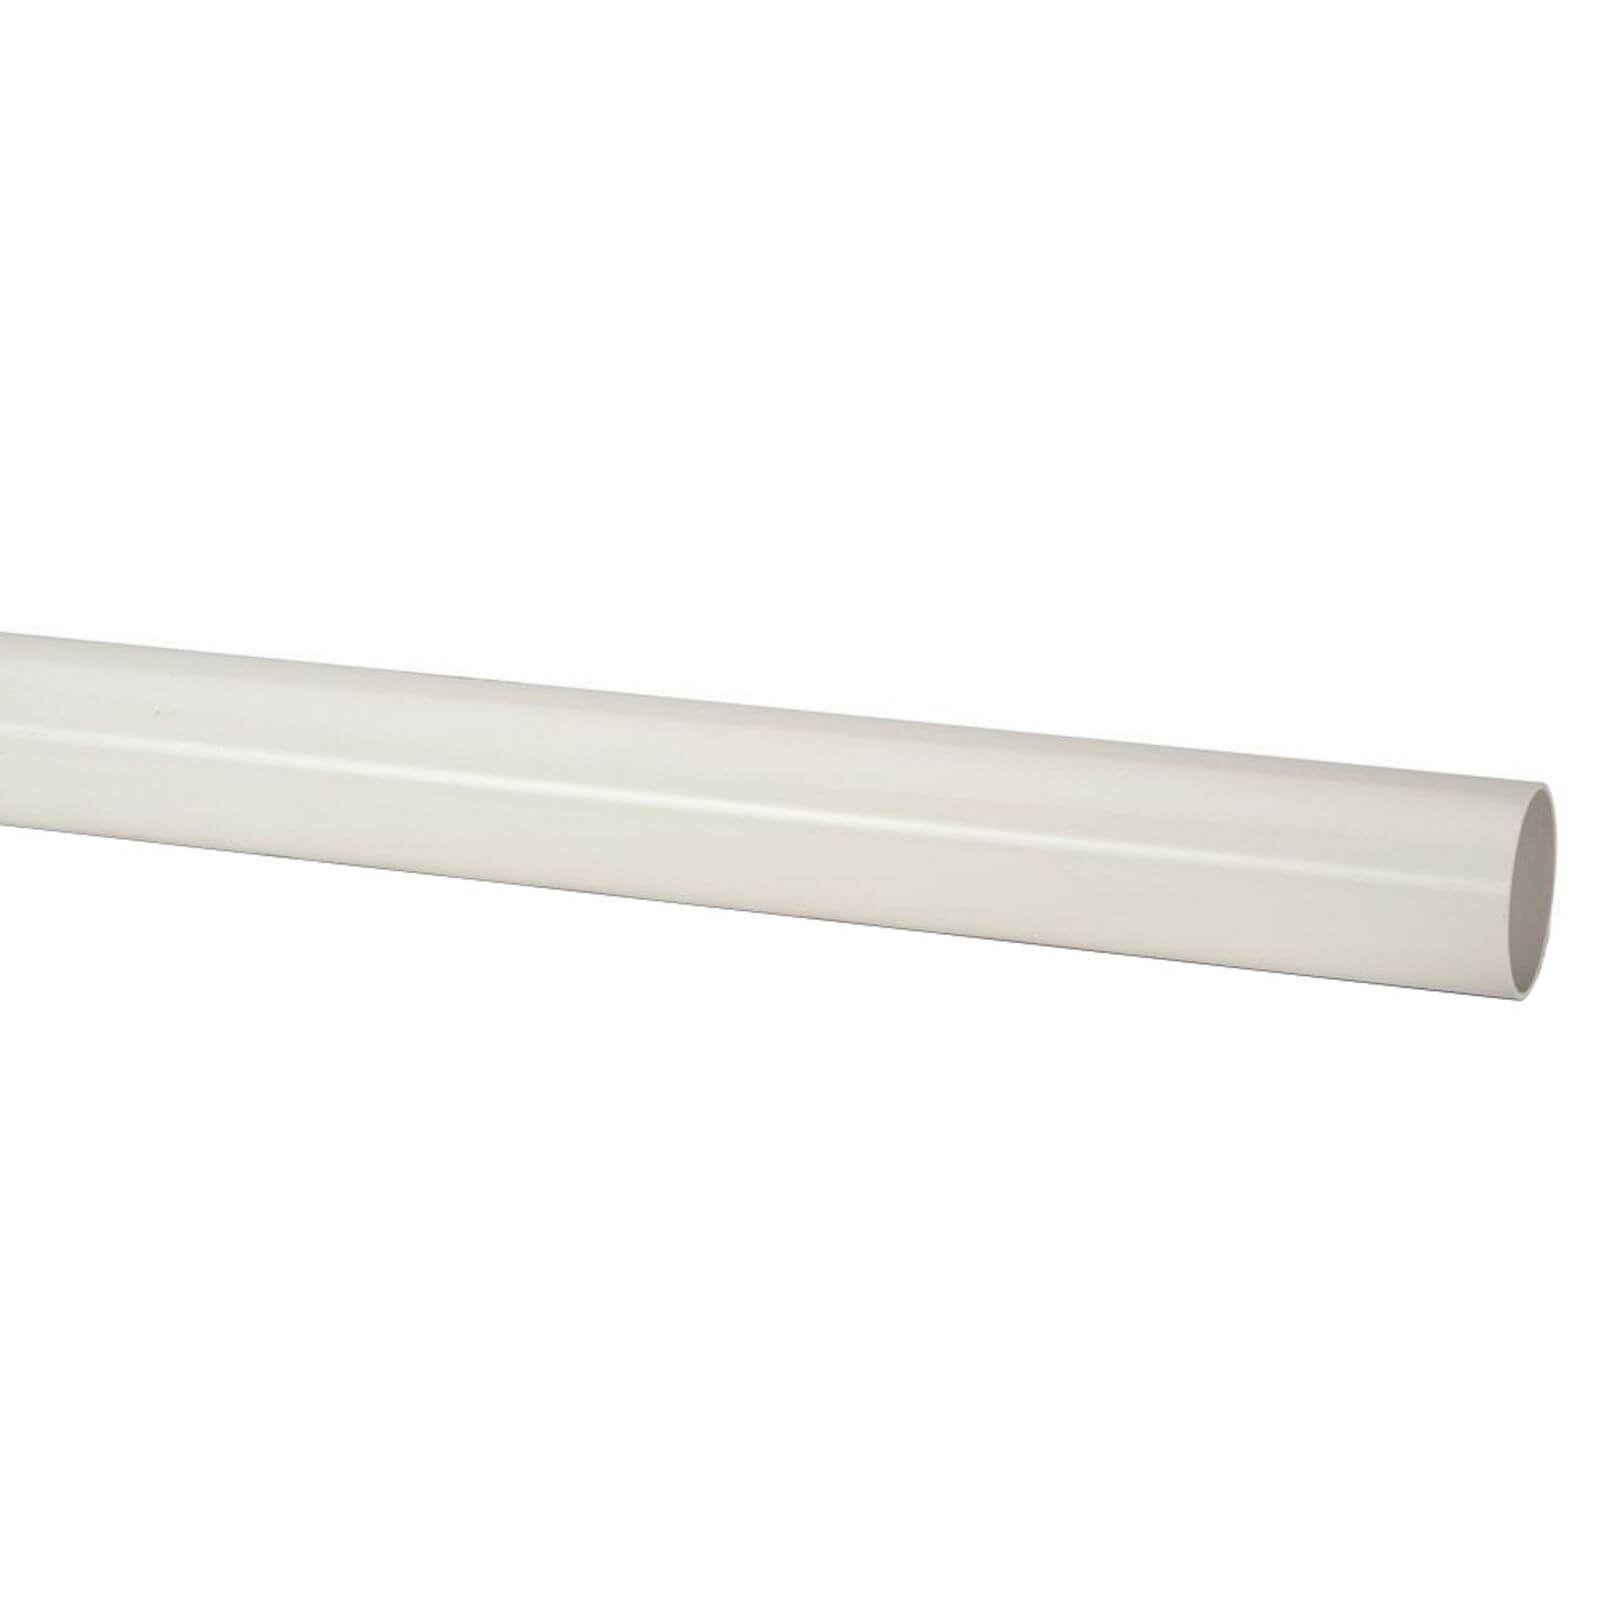 Polypipe Round Downpipe - 68mm x 2.5m - White